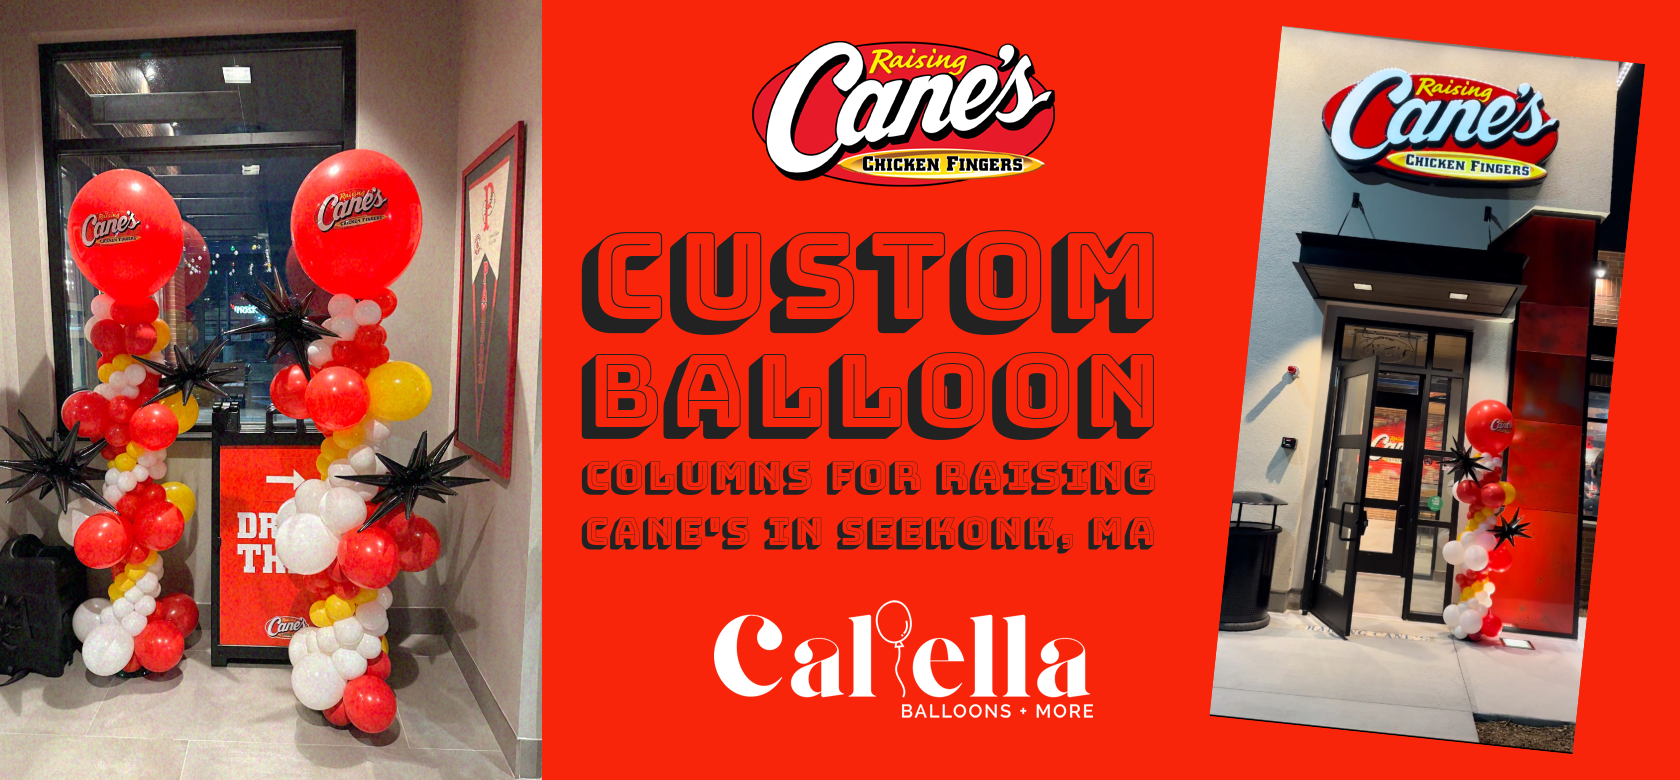 You are currently viewing Custom Balloon Columns for Raising Cane’s in Seekonk, MA